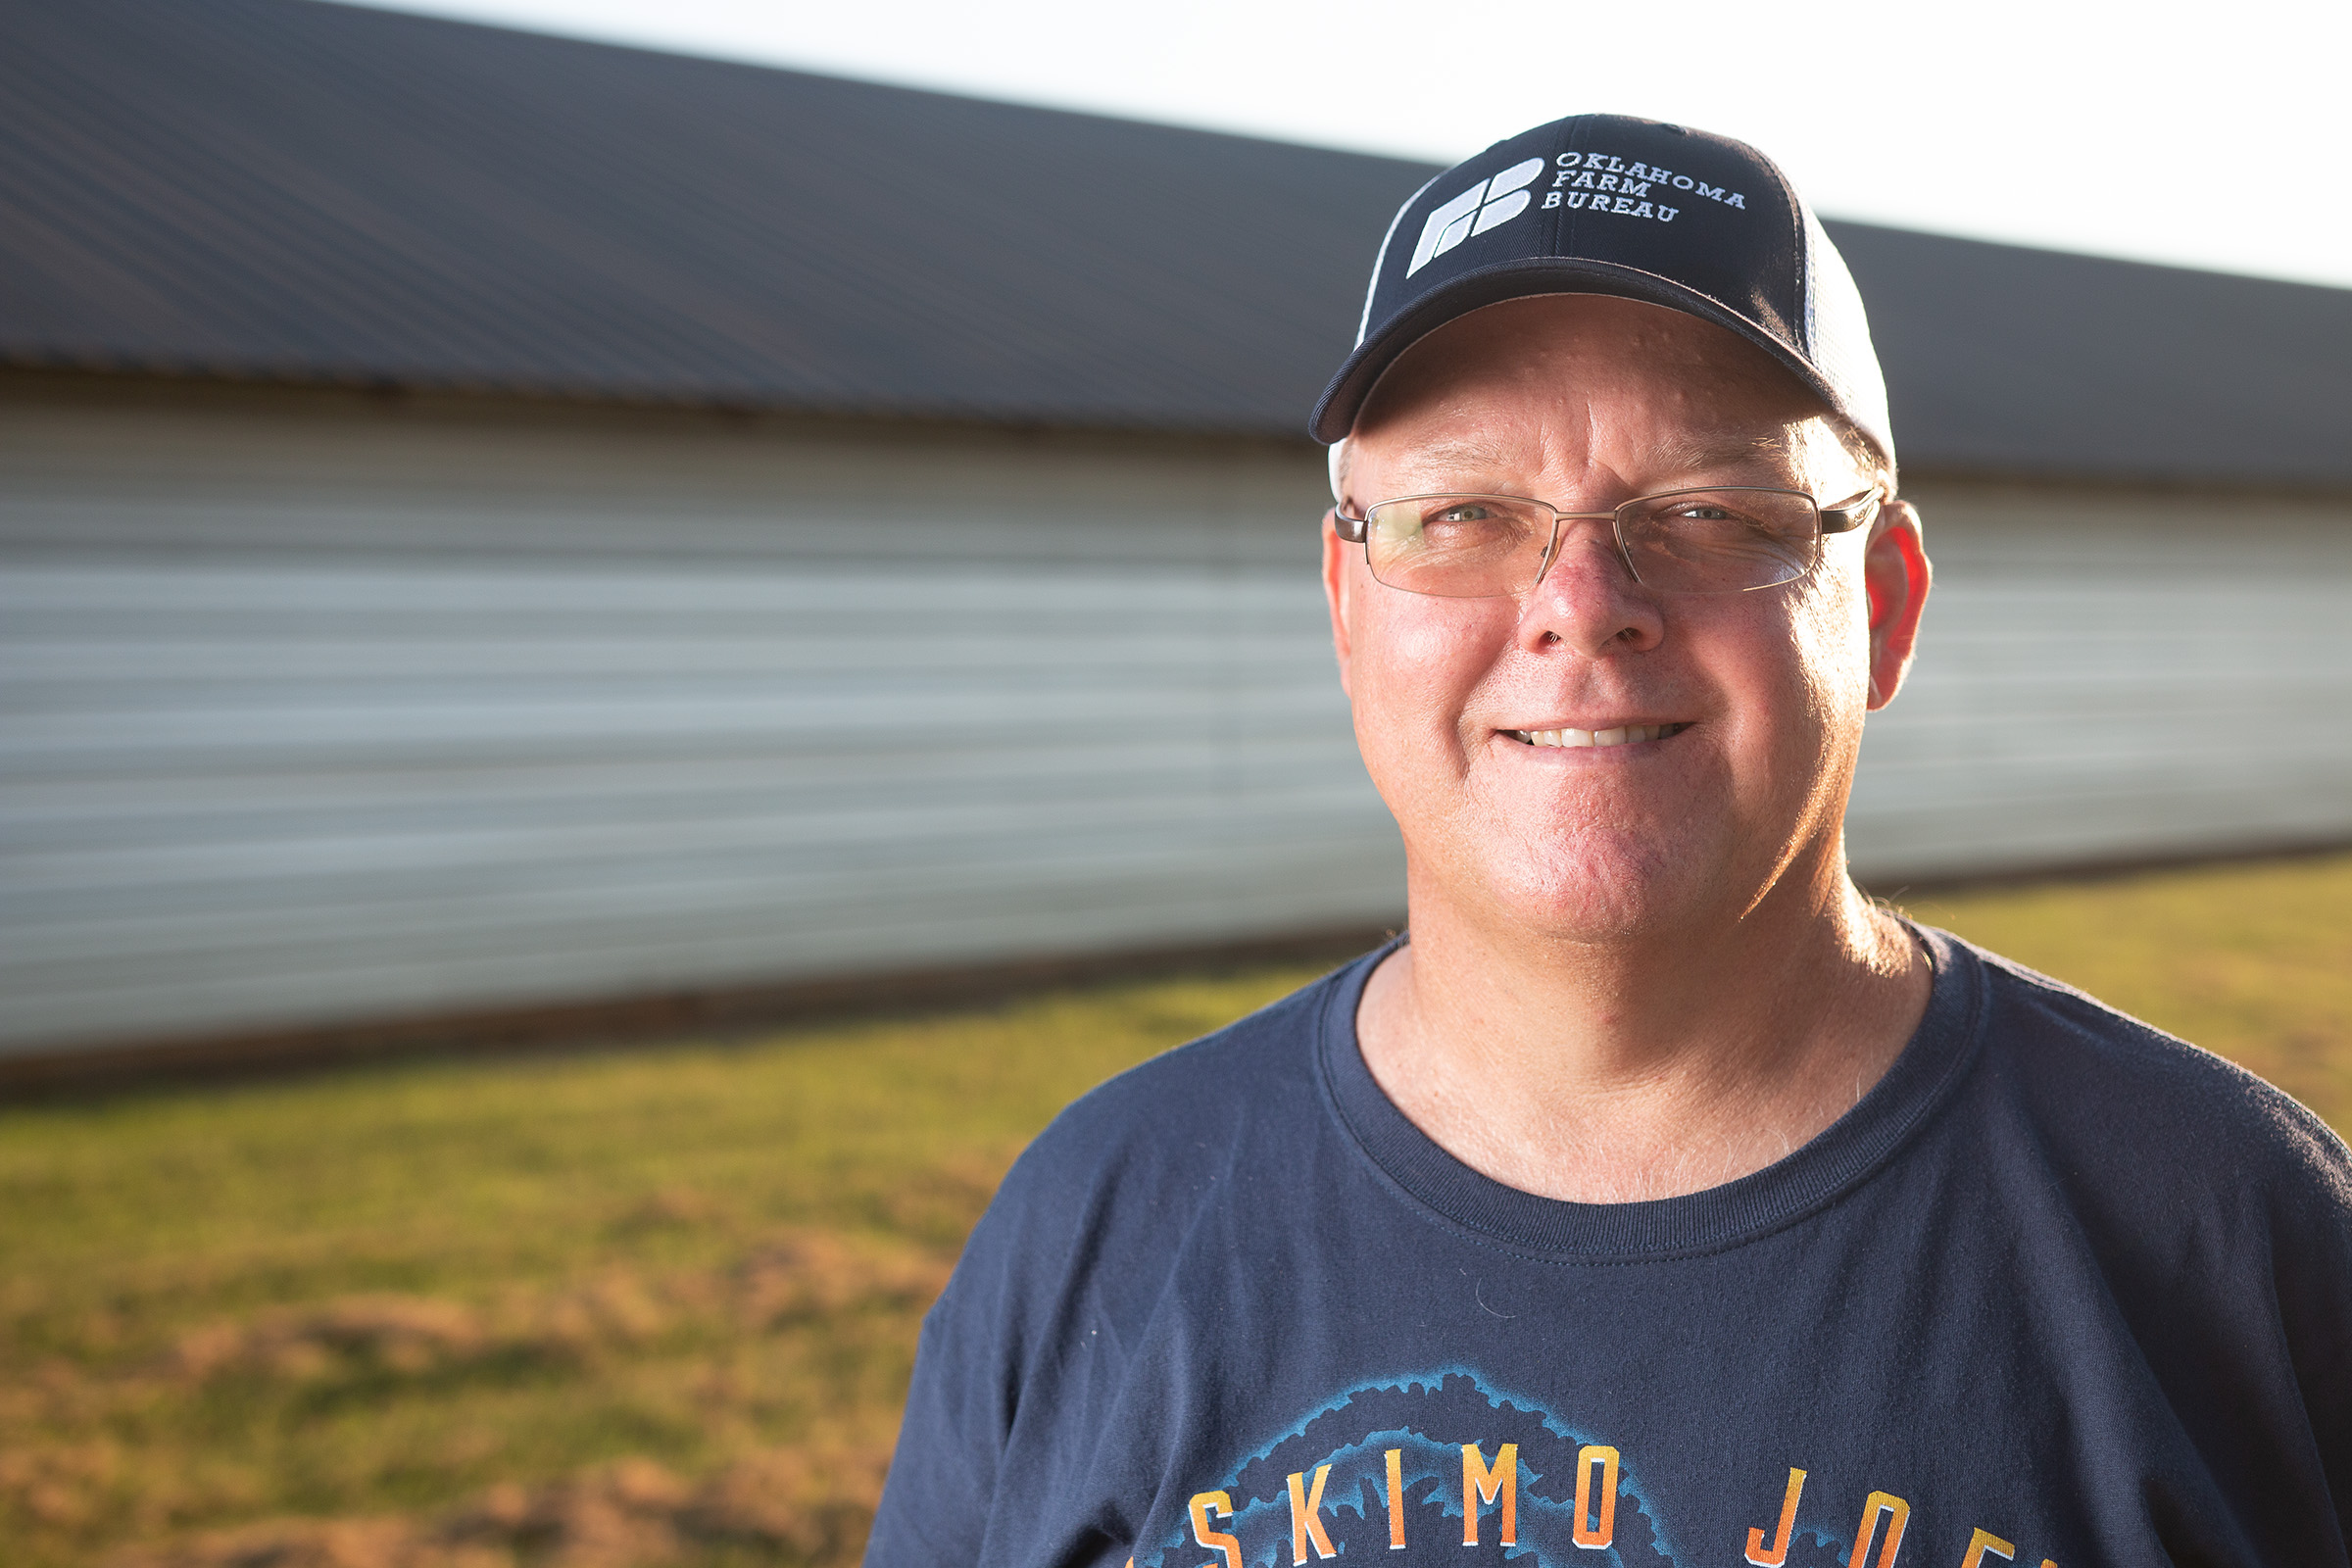 OKFB Member Brent Bolen Reflects on His Work on AFBF Poultry Working Group